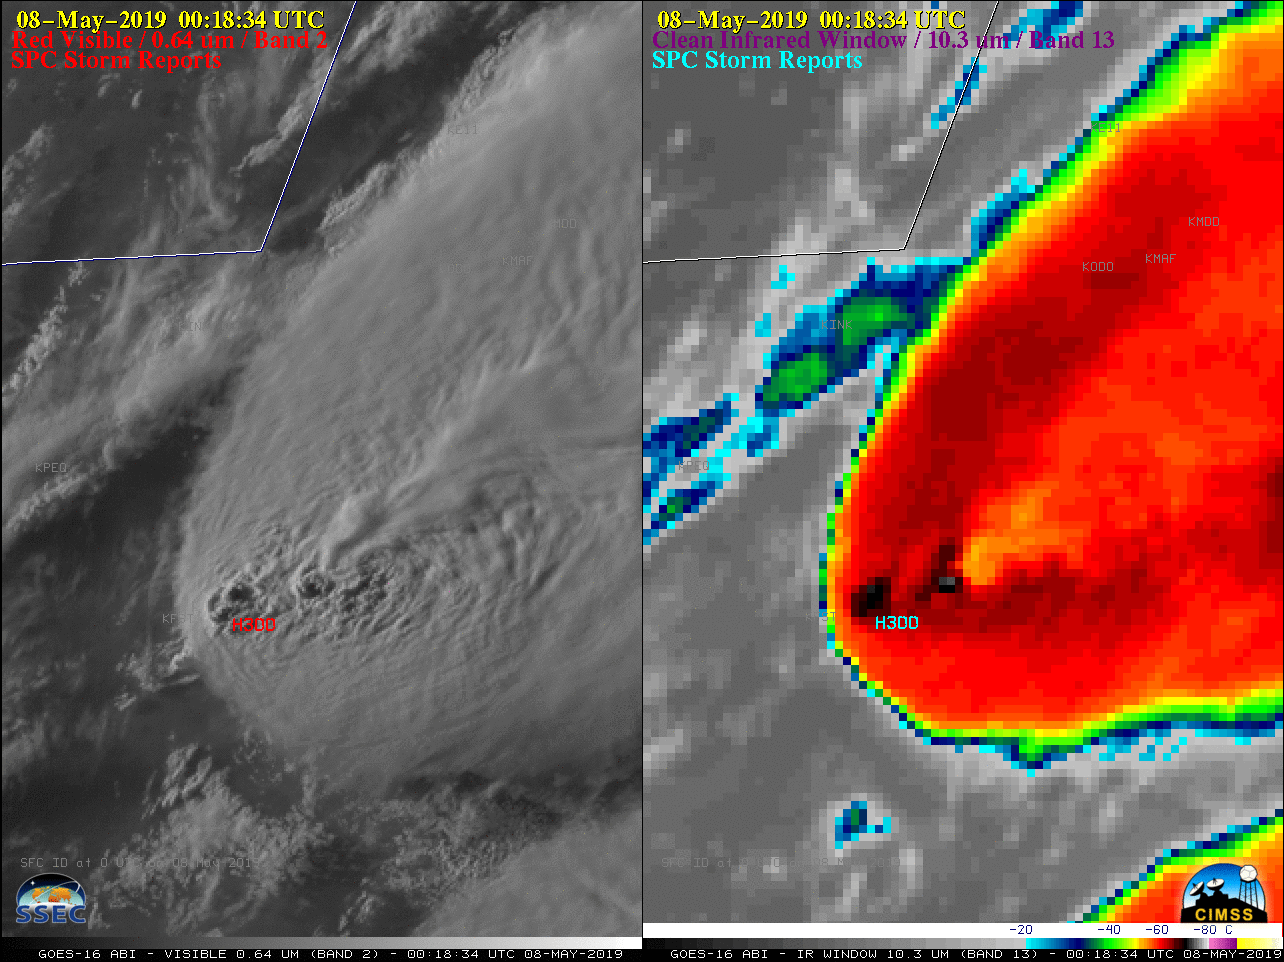 GOES-16 "Red" Visible (0.64 µm, left) and "Clean" Infrared Window (10.3 µm, right) images with plots of SPC storm reports [click to play animation | MP4]